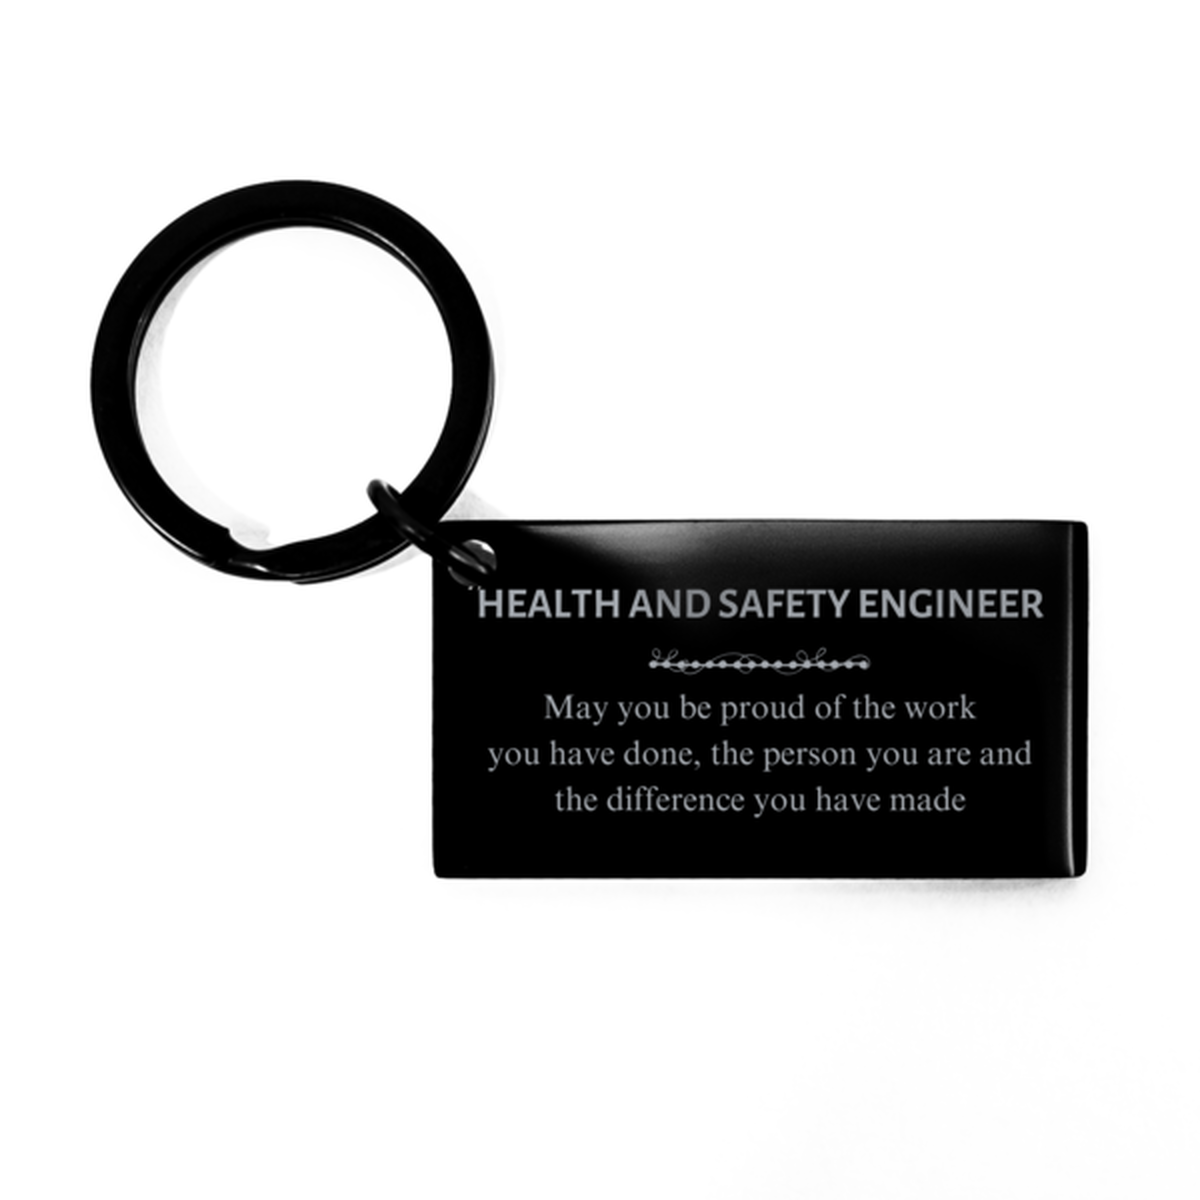 Medical Assistant May you be proud of the work you have done, Retirement Health and Safety Engineer Keychain for Colleague Appreciation Gifts Amazing for Health and Safety Engineer